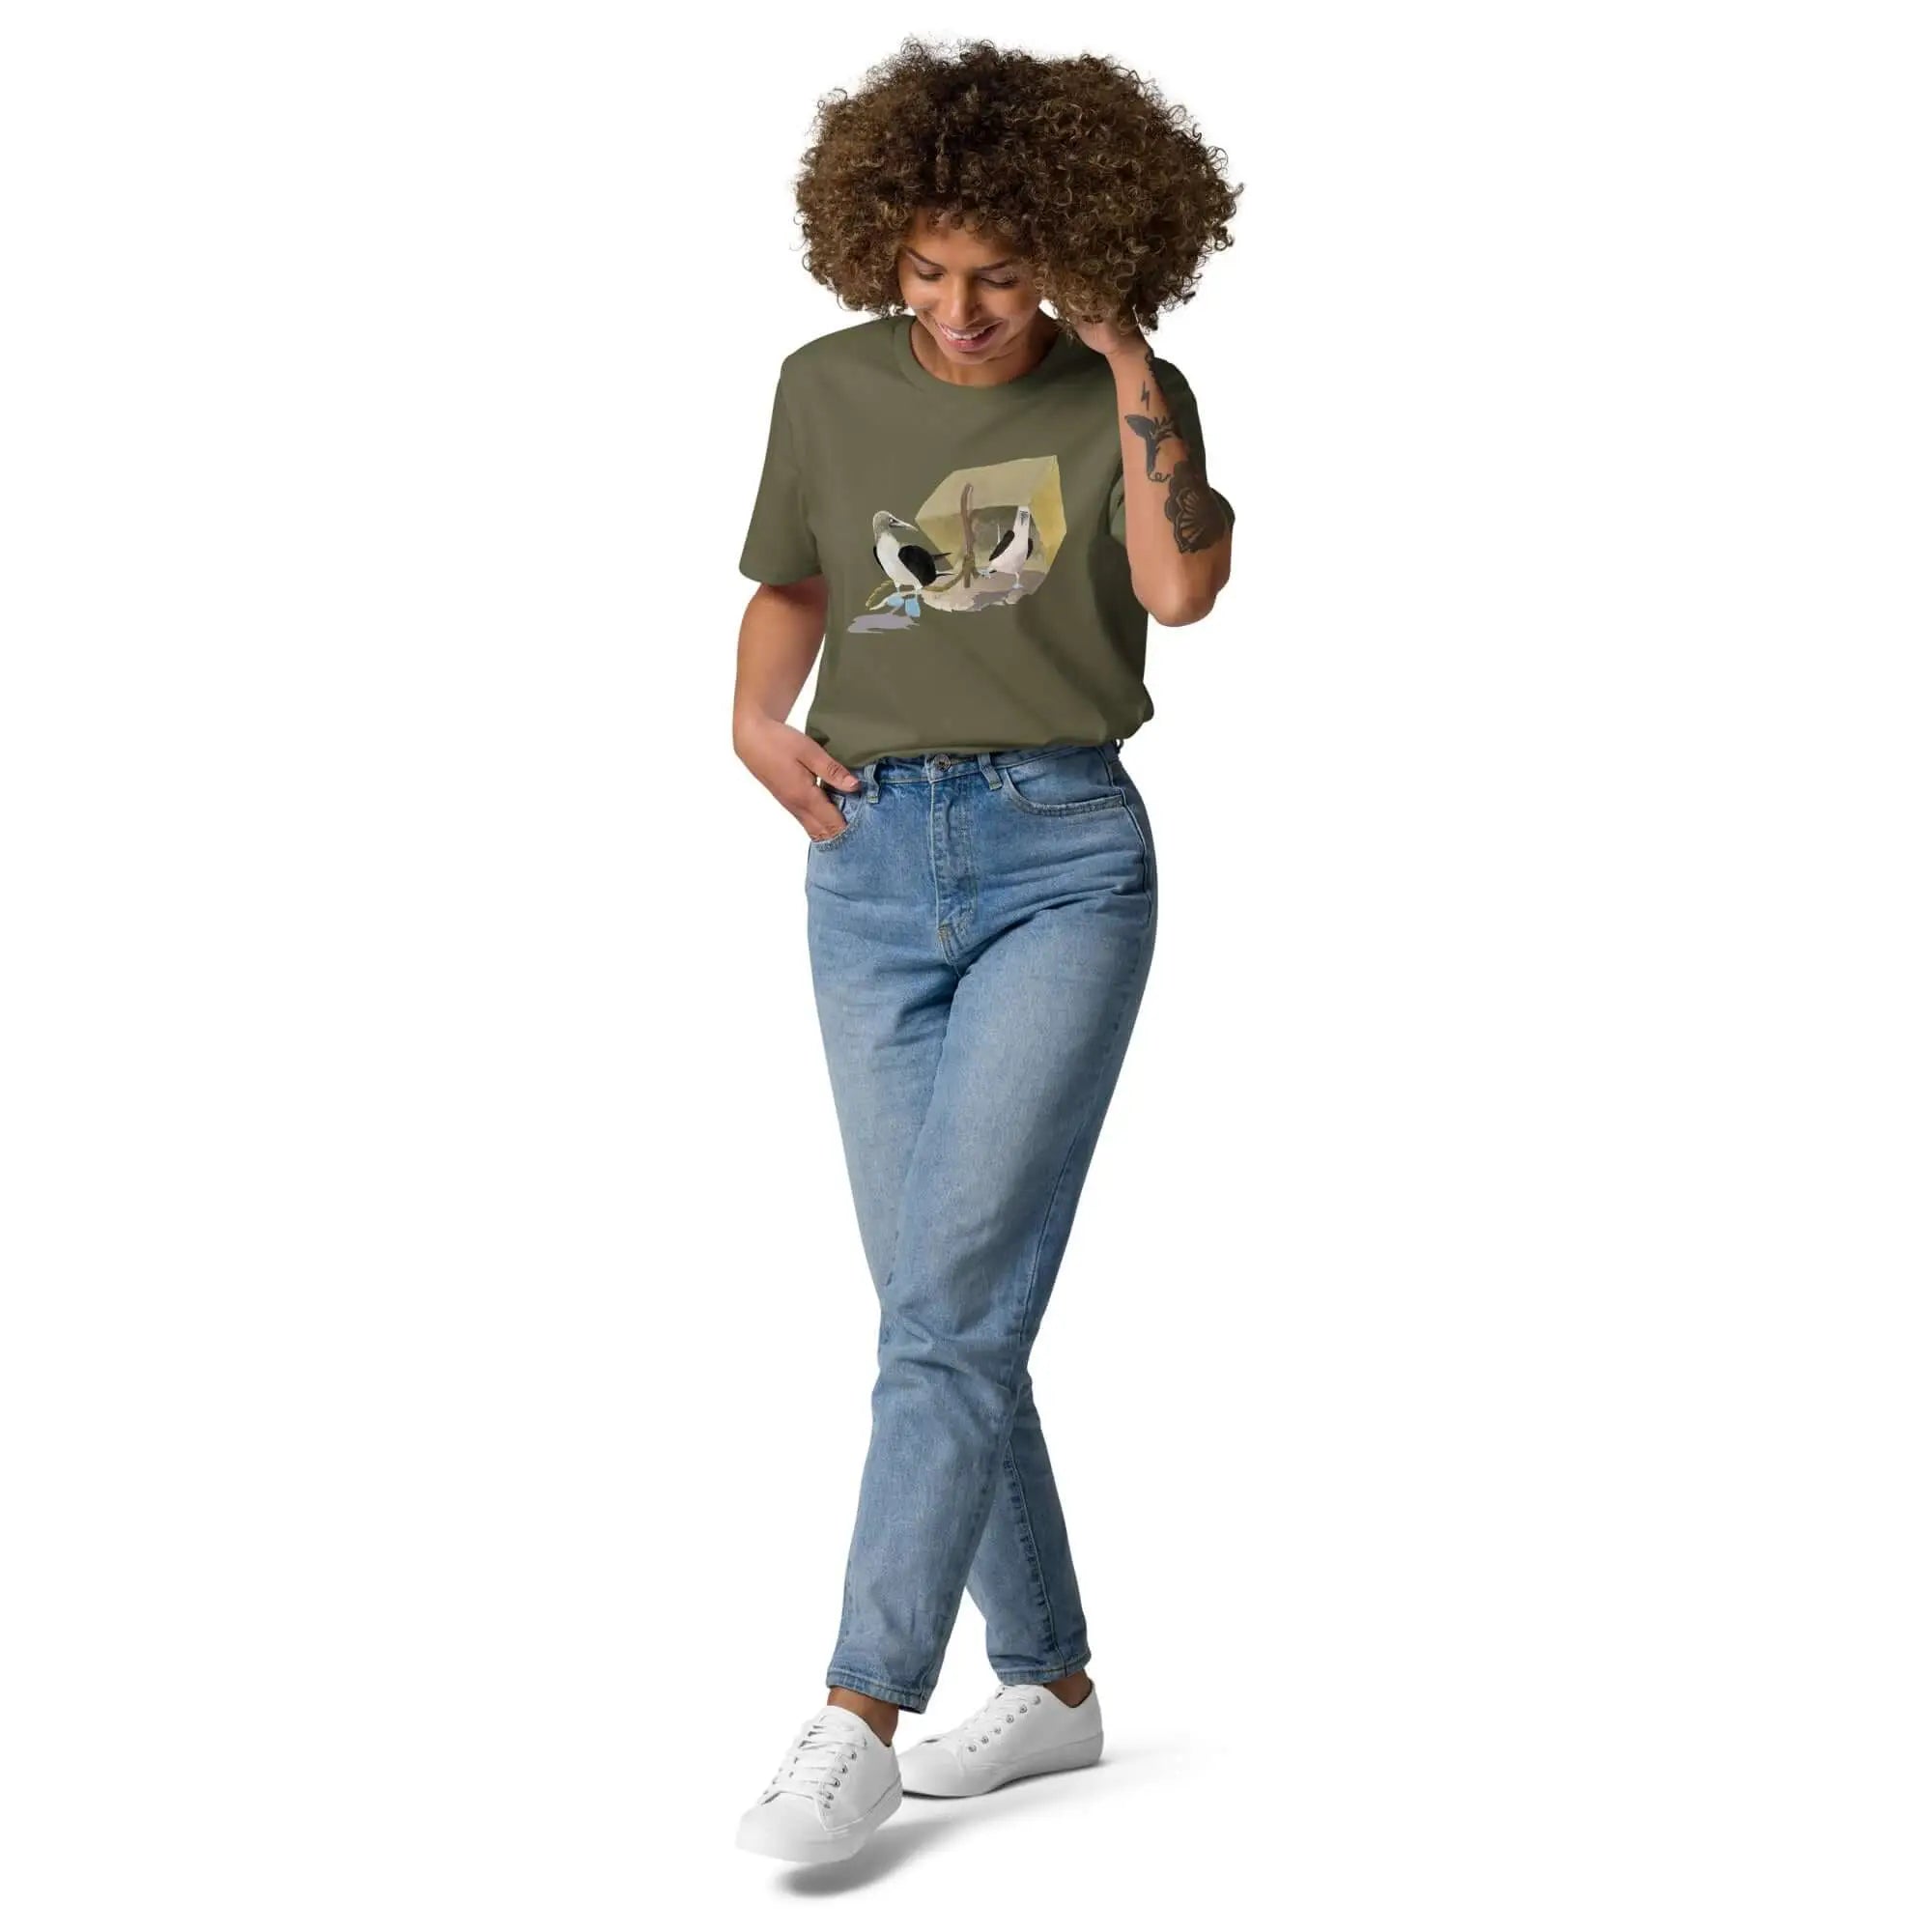 Organic Cotton T-Shirt | Booby Trap: Woman in green shirt and jeans